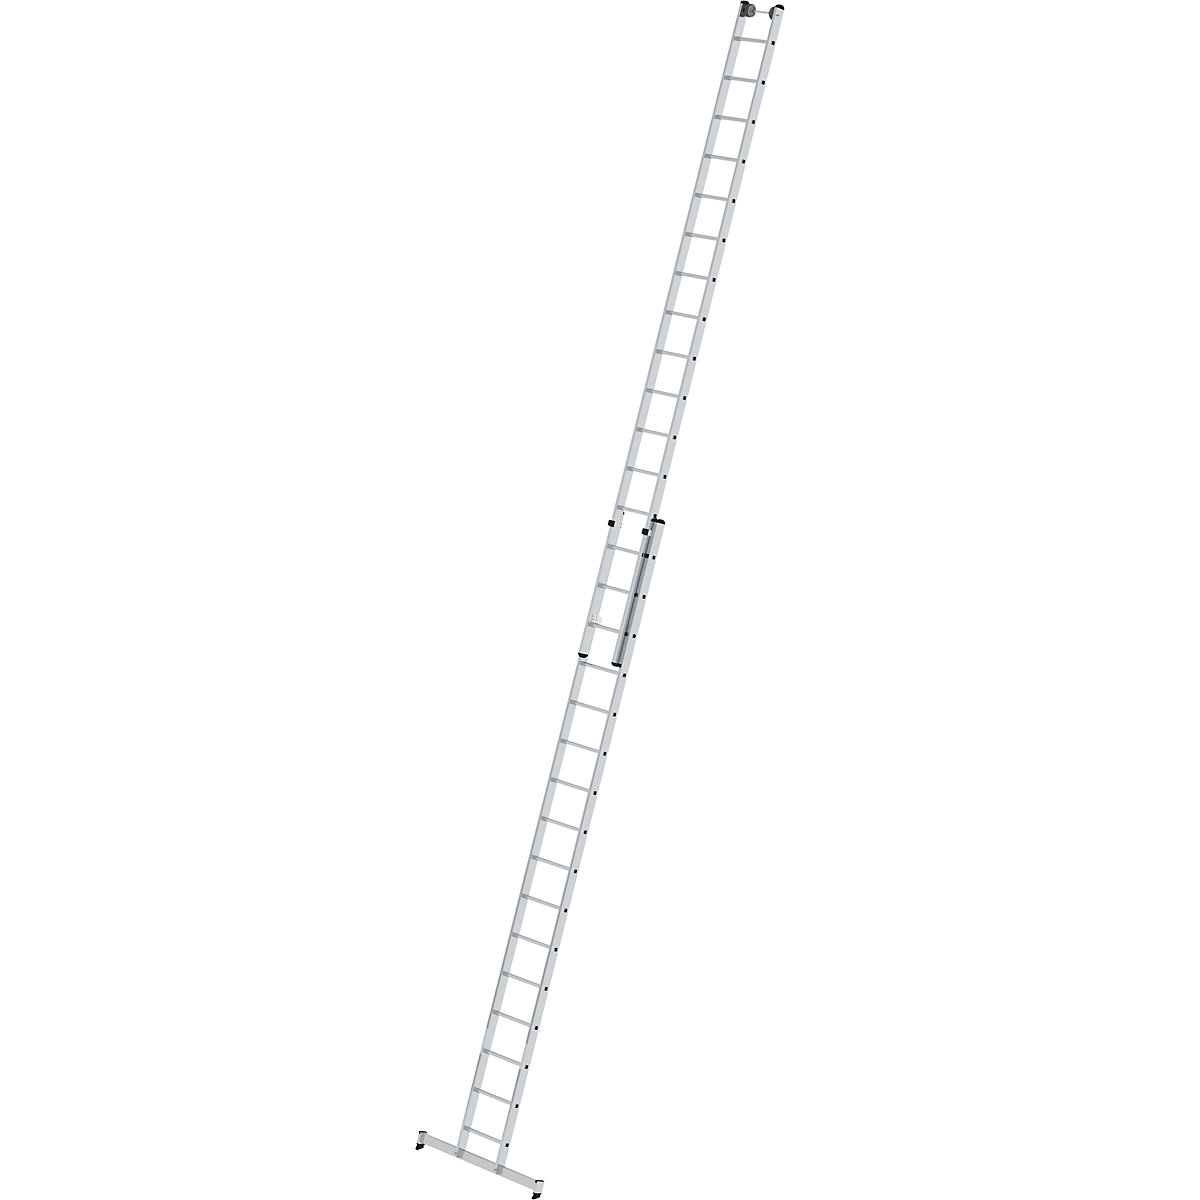 Height adjustable lean-to ladder – MUNK, extension ladder, 2-part, 2 x 16 rungs, with nivello® support-7